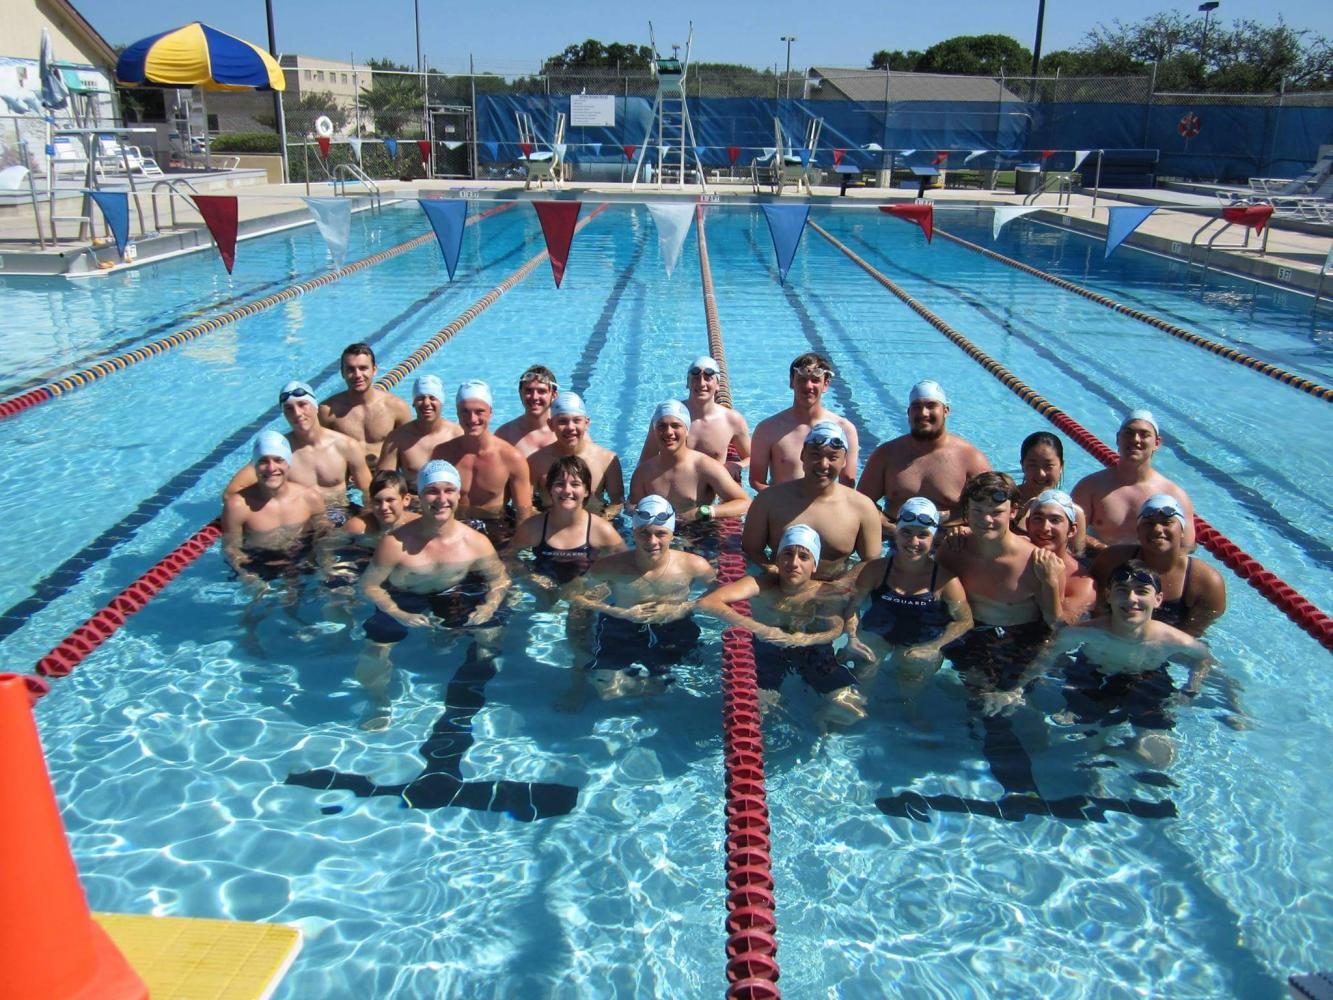 Lifeguards at El Salido Pool gather for a picture after swimming 20 laps for Swim Across Texas. Photo courtesy of El Salido.